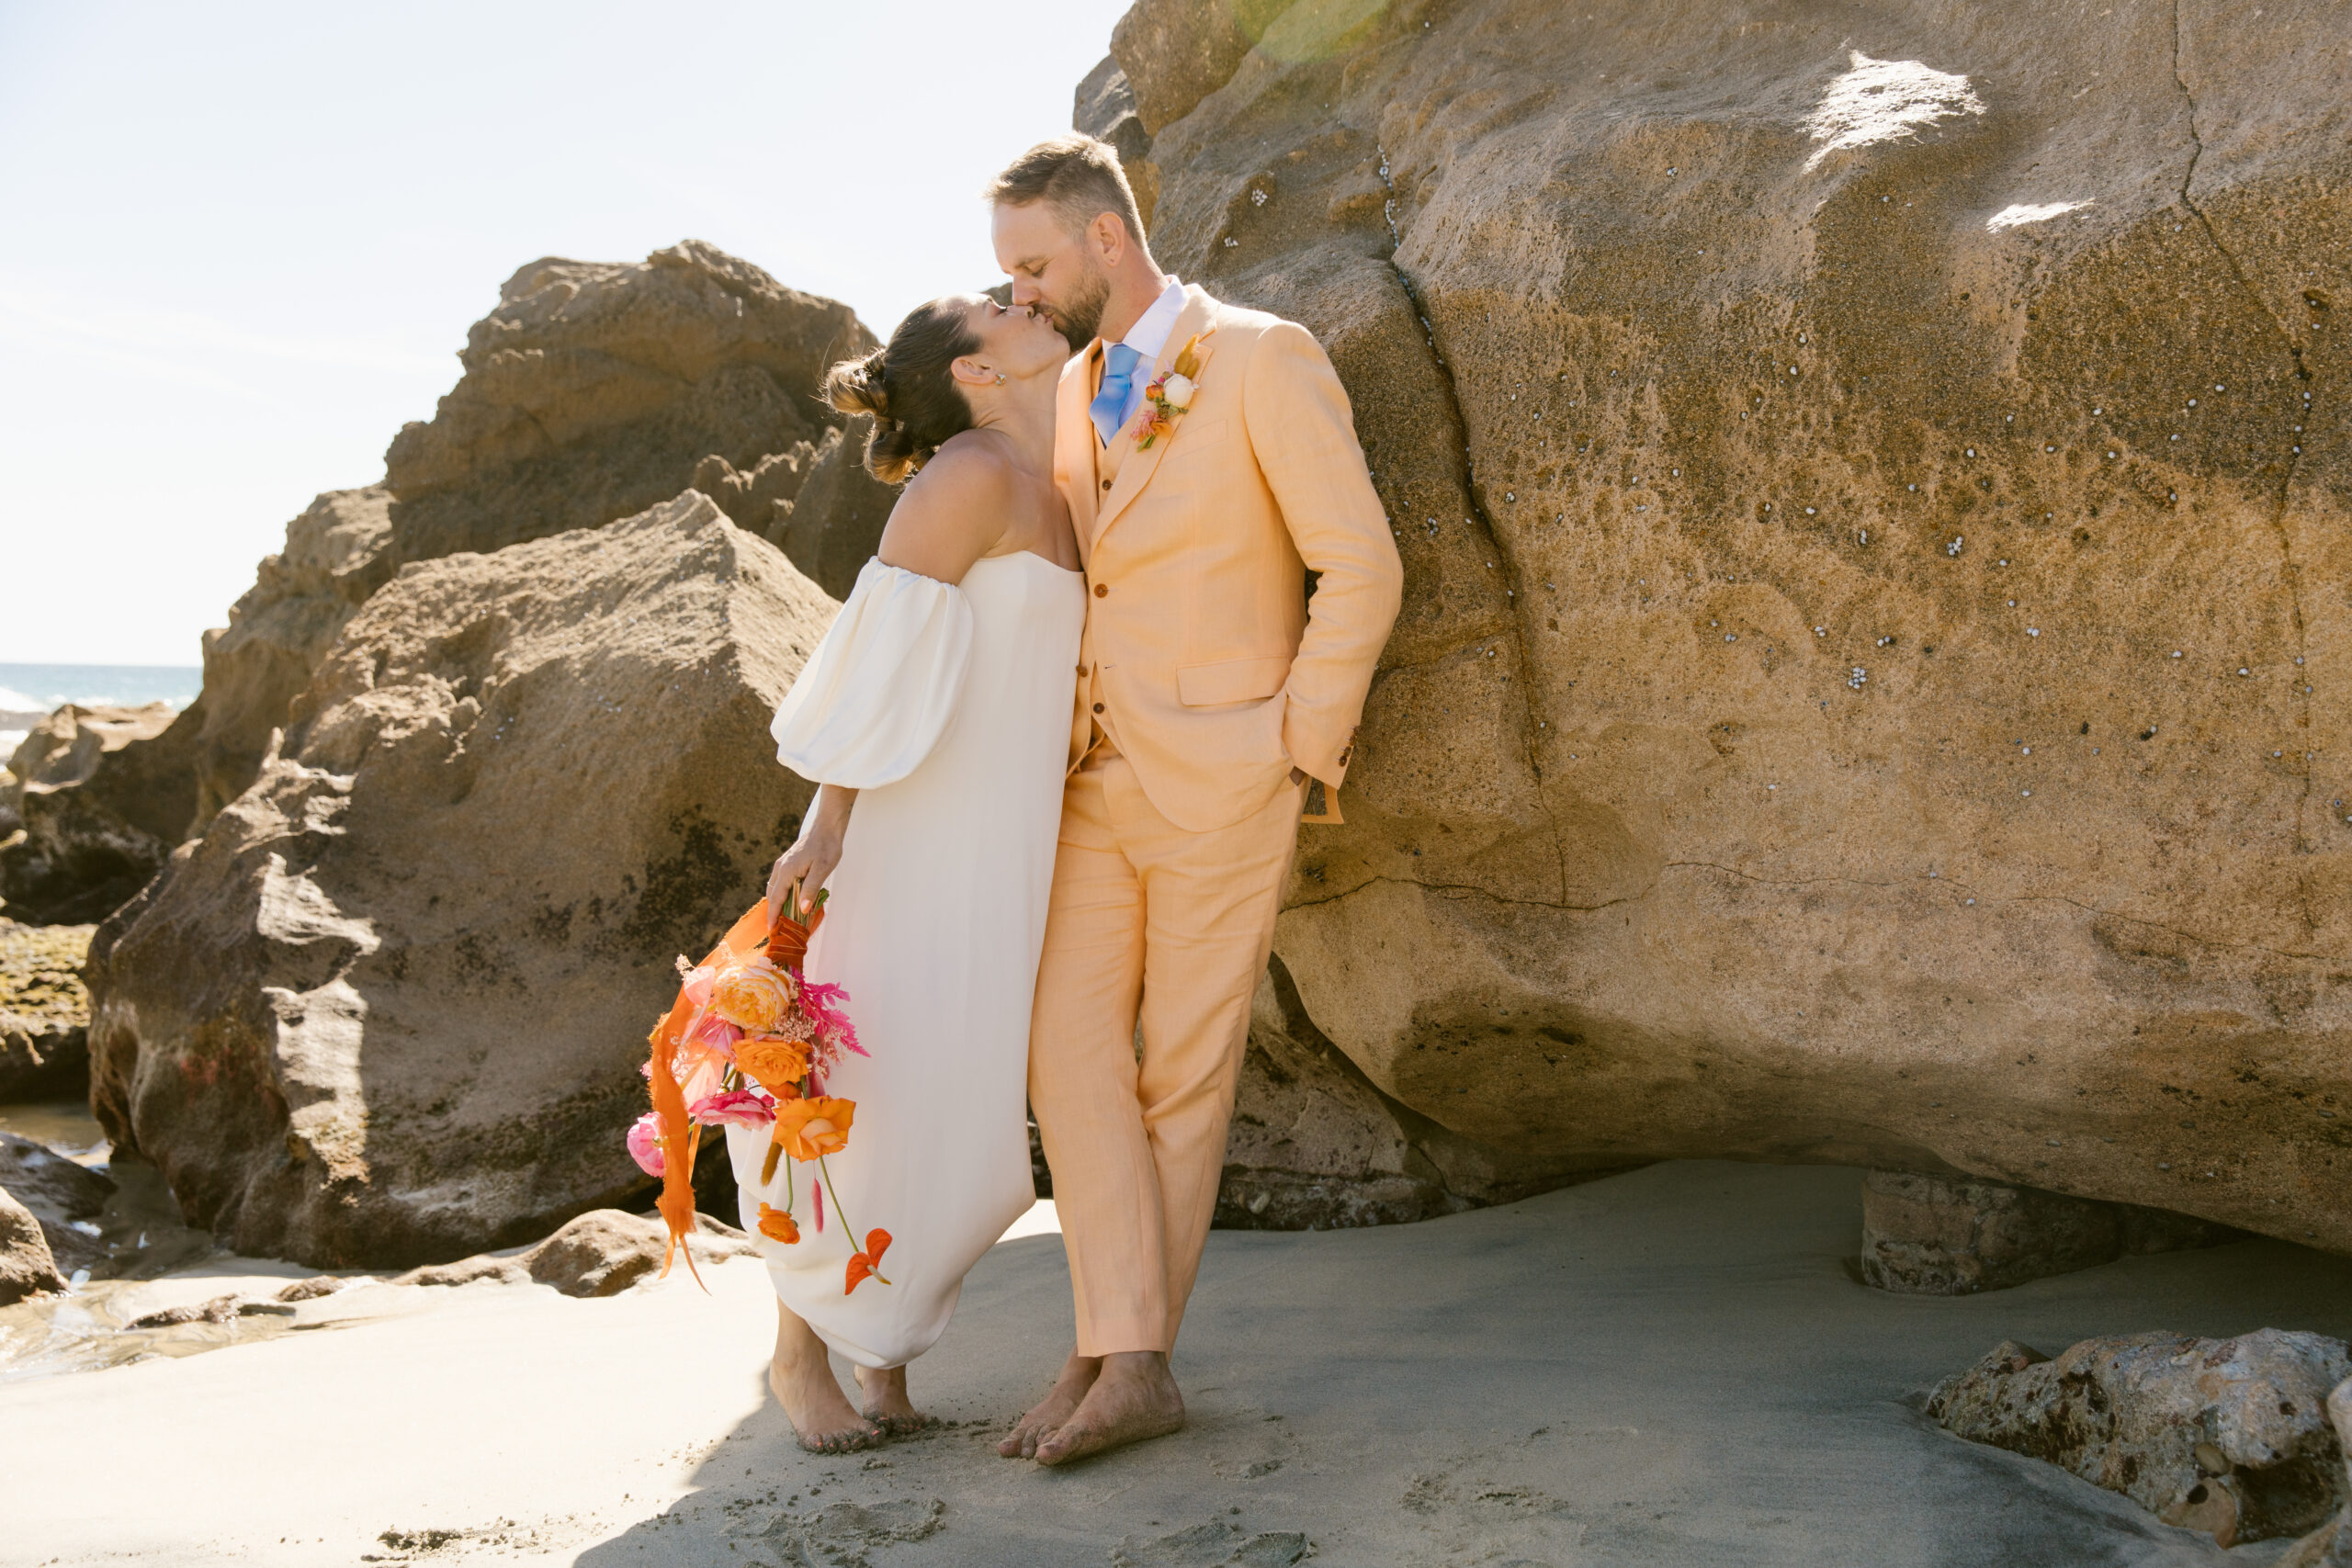 verona wedding gown kamperett strapless wedding dress with detachable sleeves. colorful pink and orange wedding bouquet. colorful wedding in mexico. bridal wedding portrait mohawk high bubble ponytail hairstyle. chartreuse dolce vida shoes. 
groom peach cotswold tailors suit with light blue tie and orange and pink boutenir. bride and groom wedding portraits kissing on beautiful beach in mexico artsy portraits